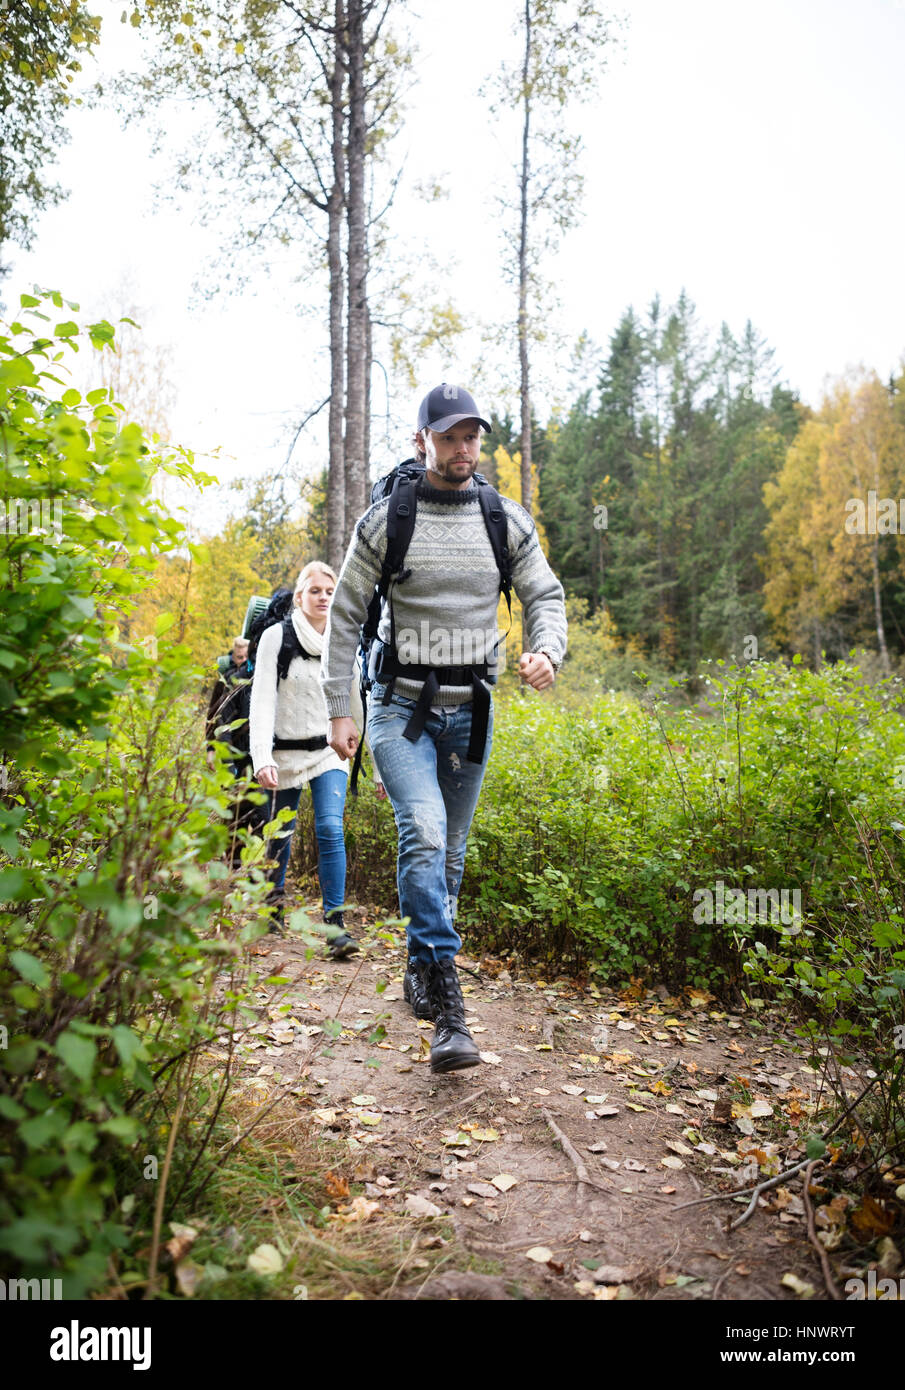 Man With Friends Walking On Hiking Trail Stock Photo